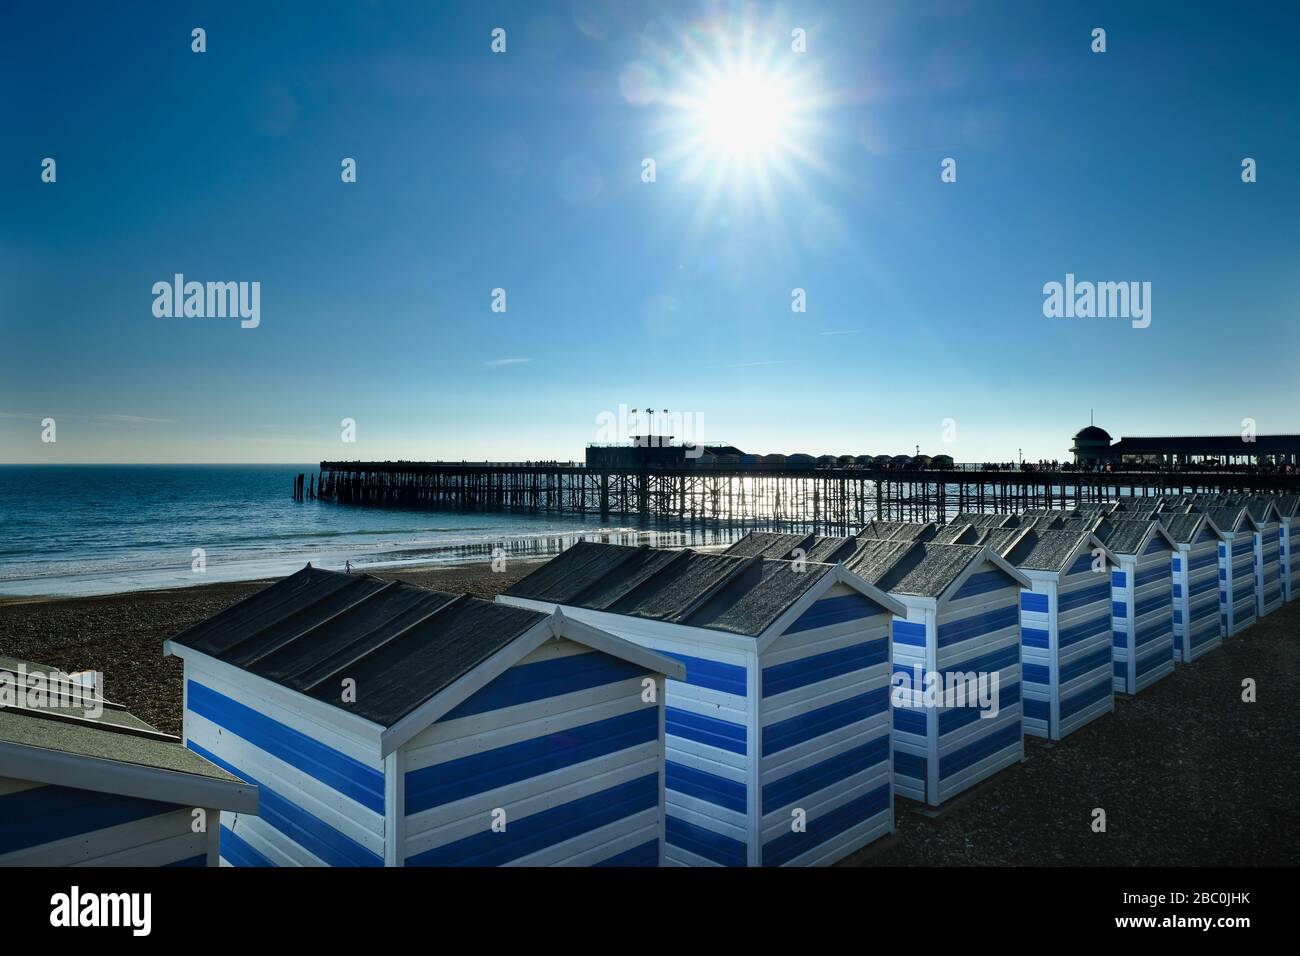 Row of beach huts on the beach next to the pier in Hastings, East Sussex, UK Stock Photo